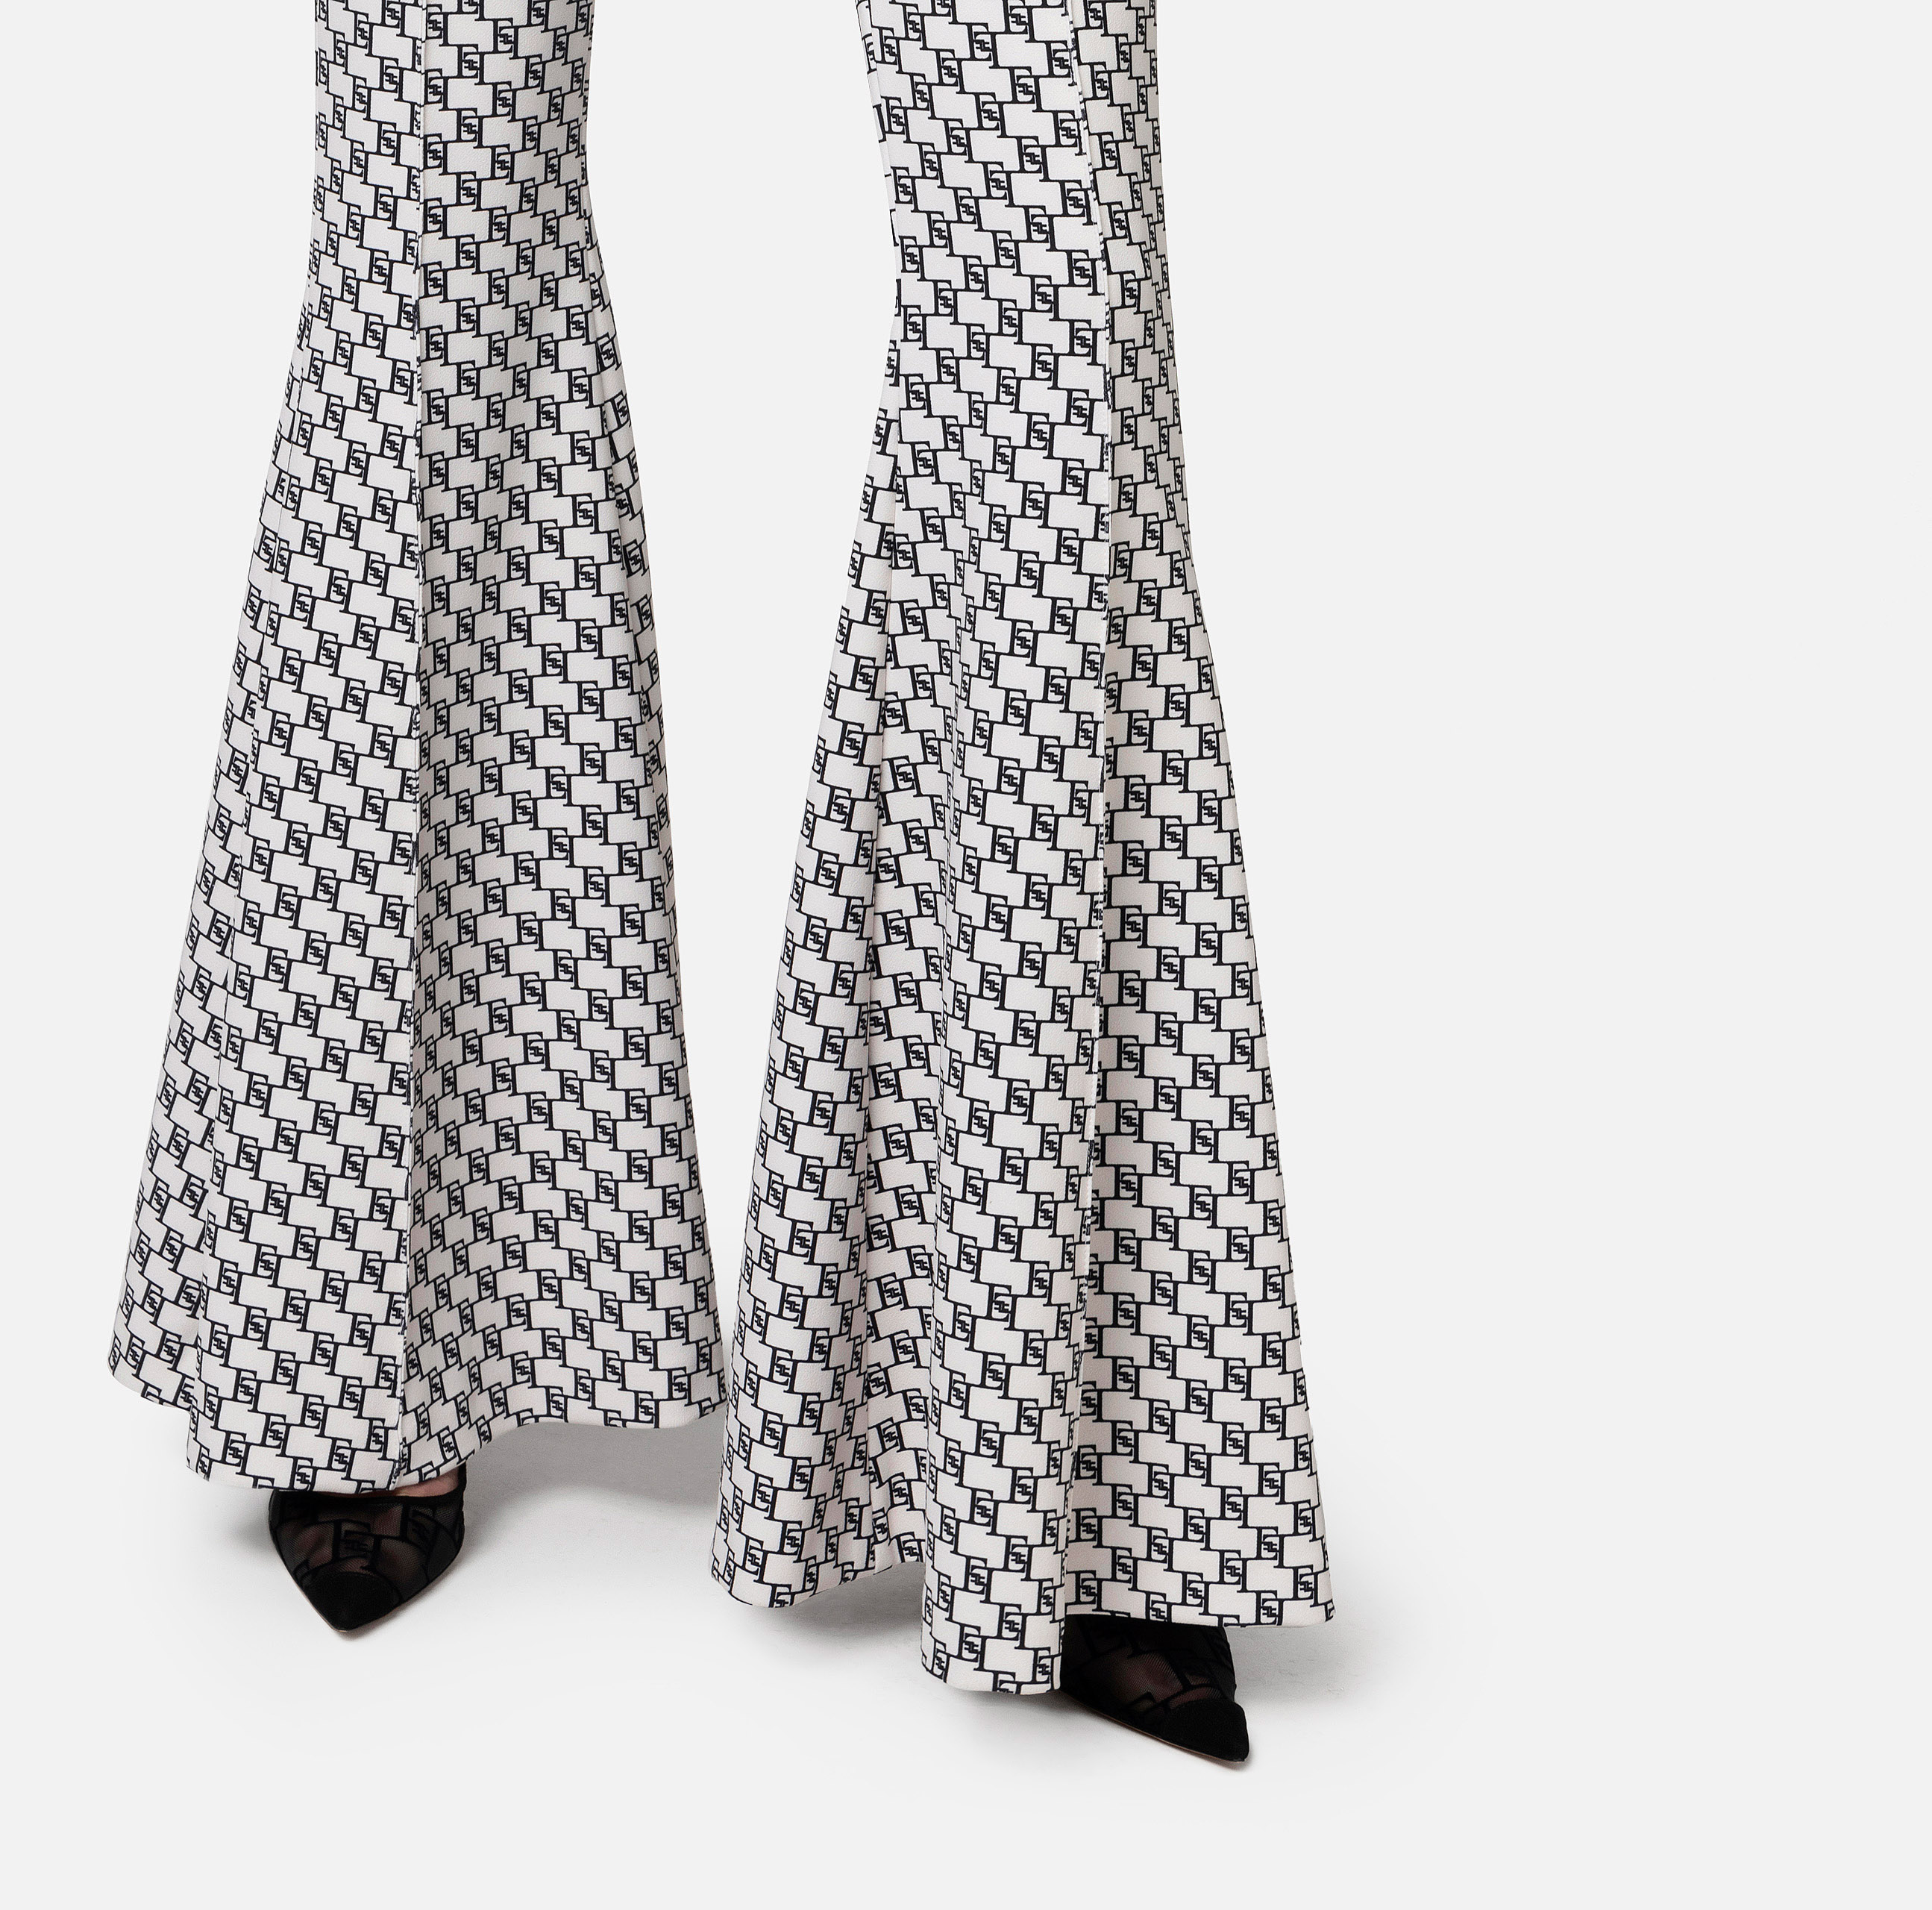 Bell-bottom trousers in stretch crêpe fabric with charms